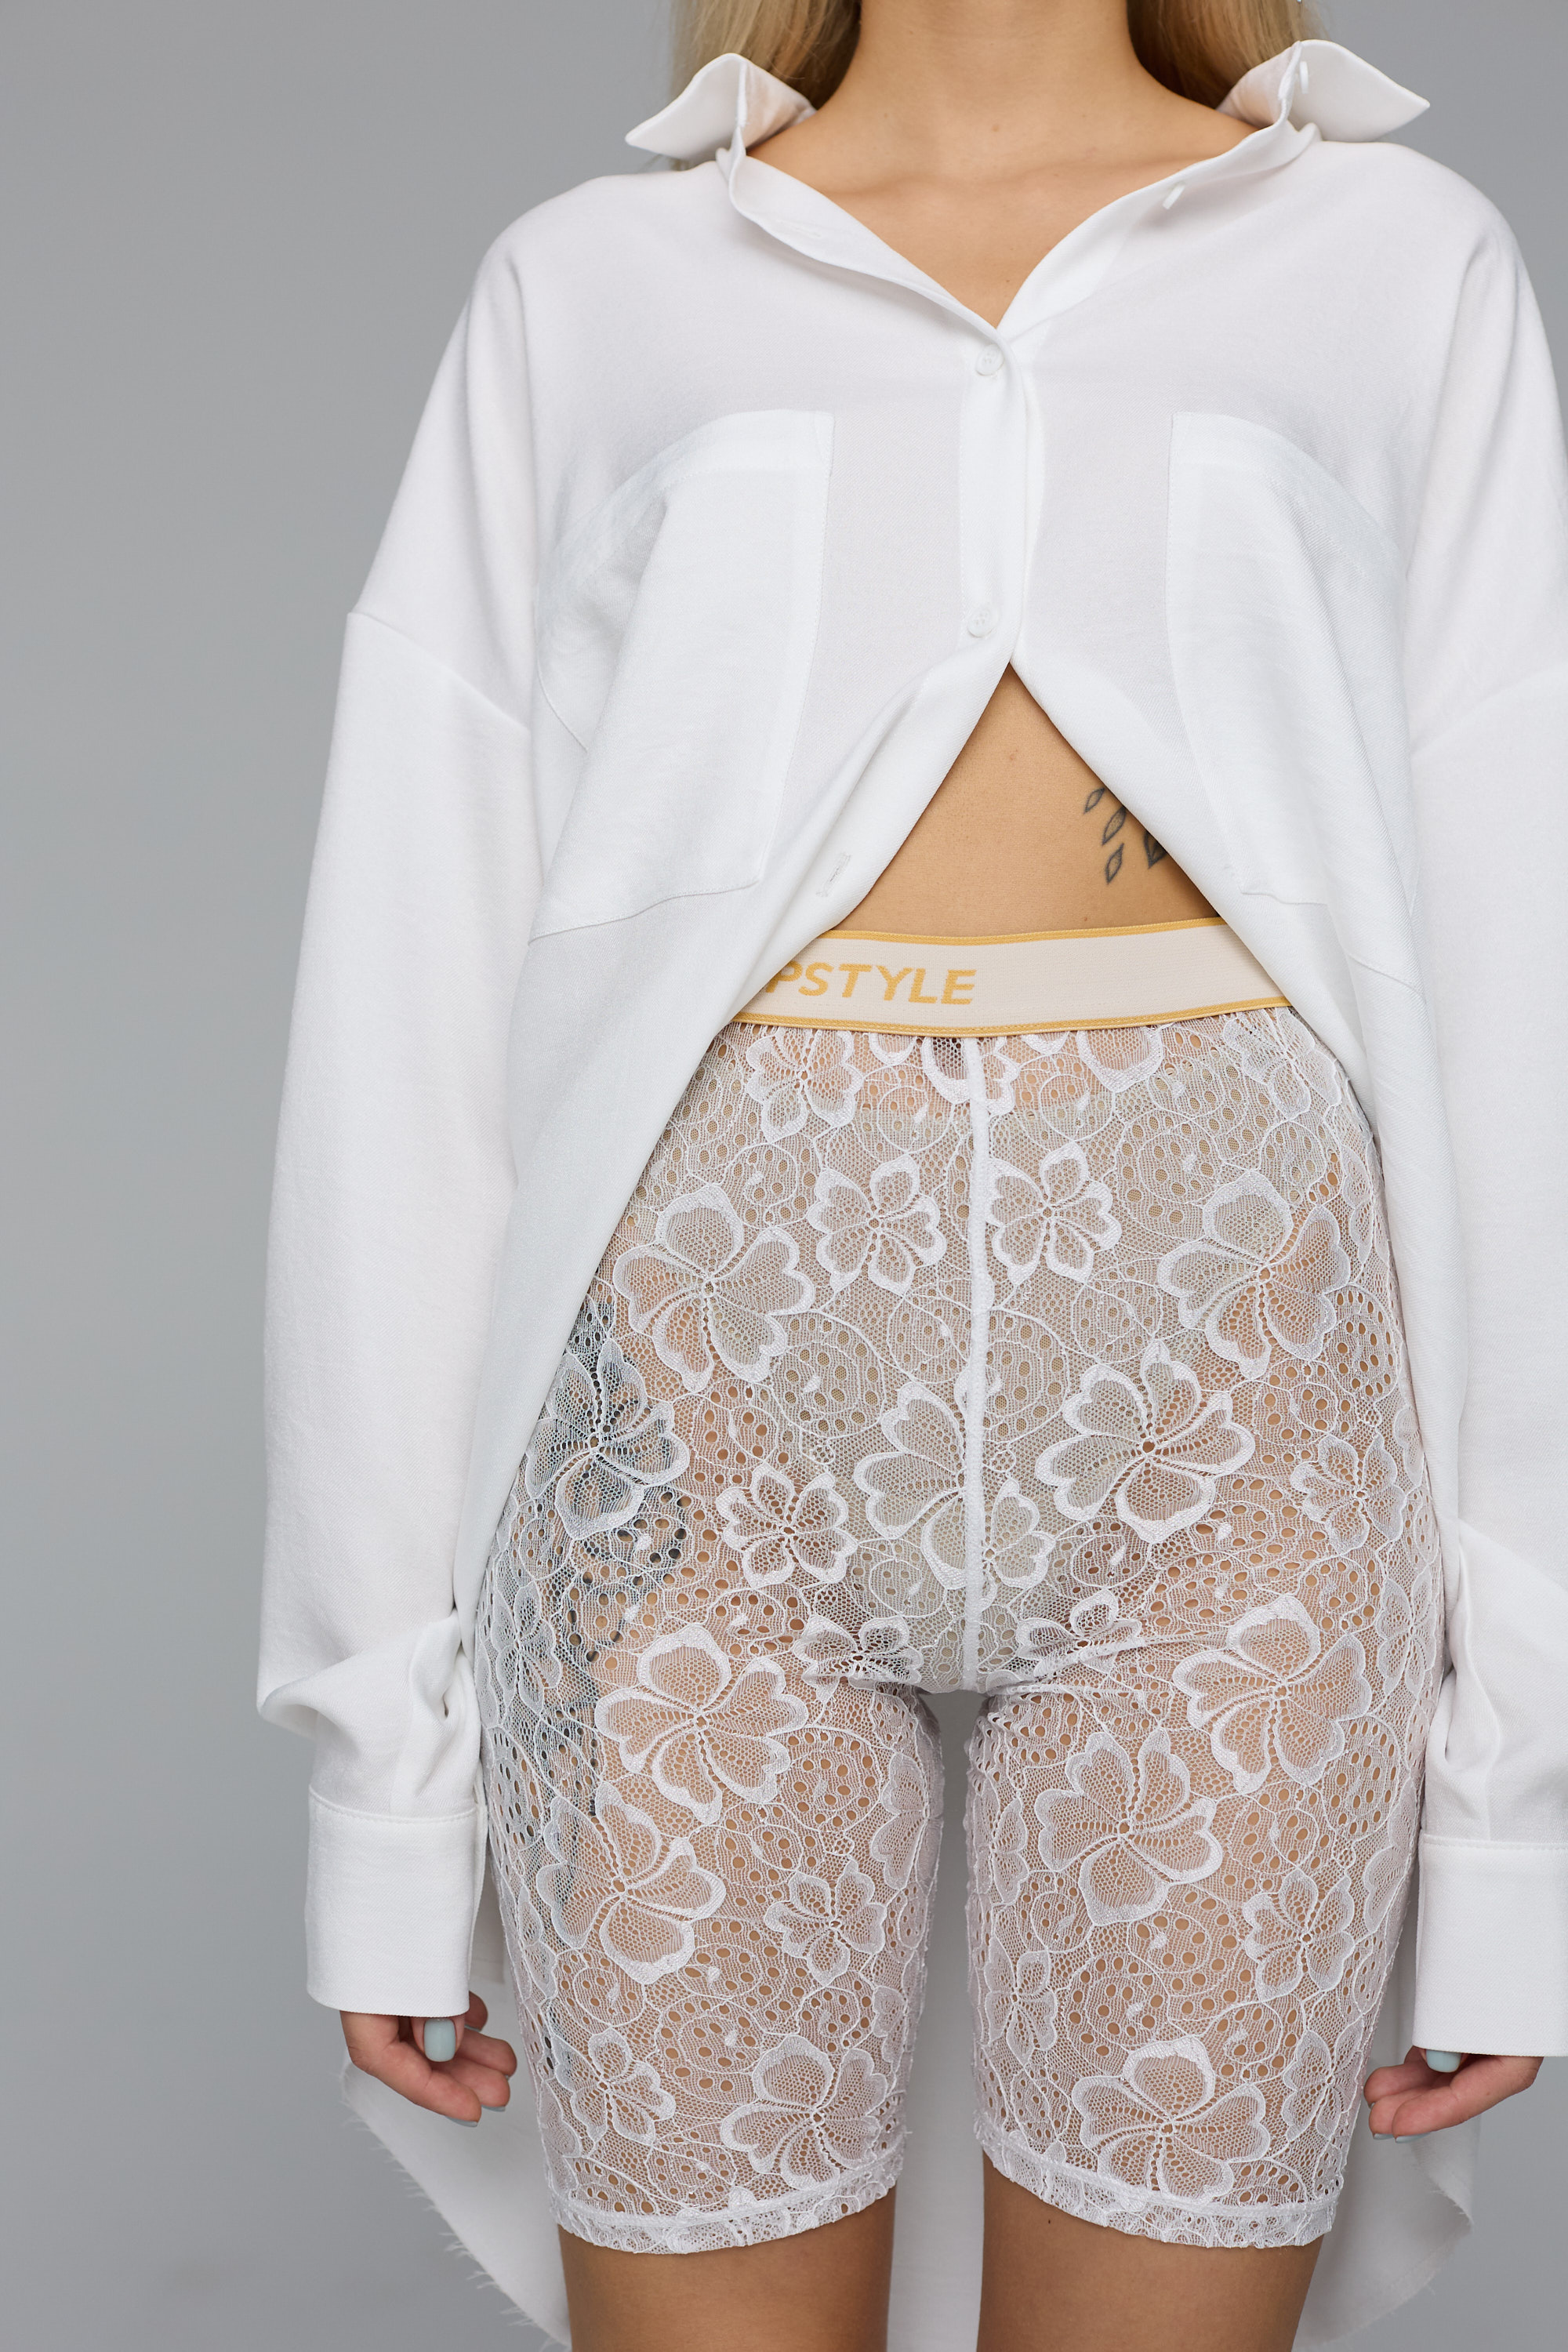 legging shorts lace in white